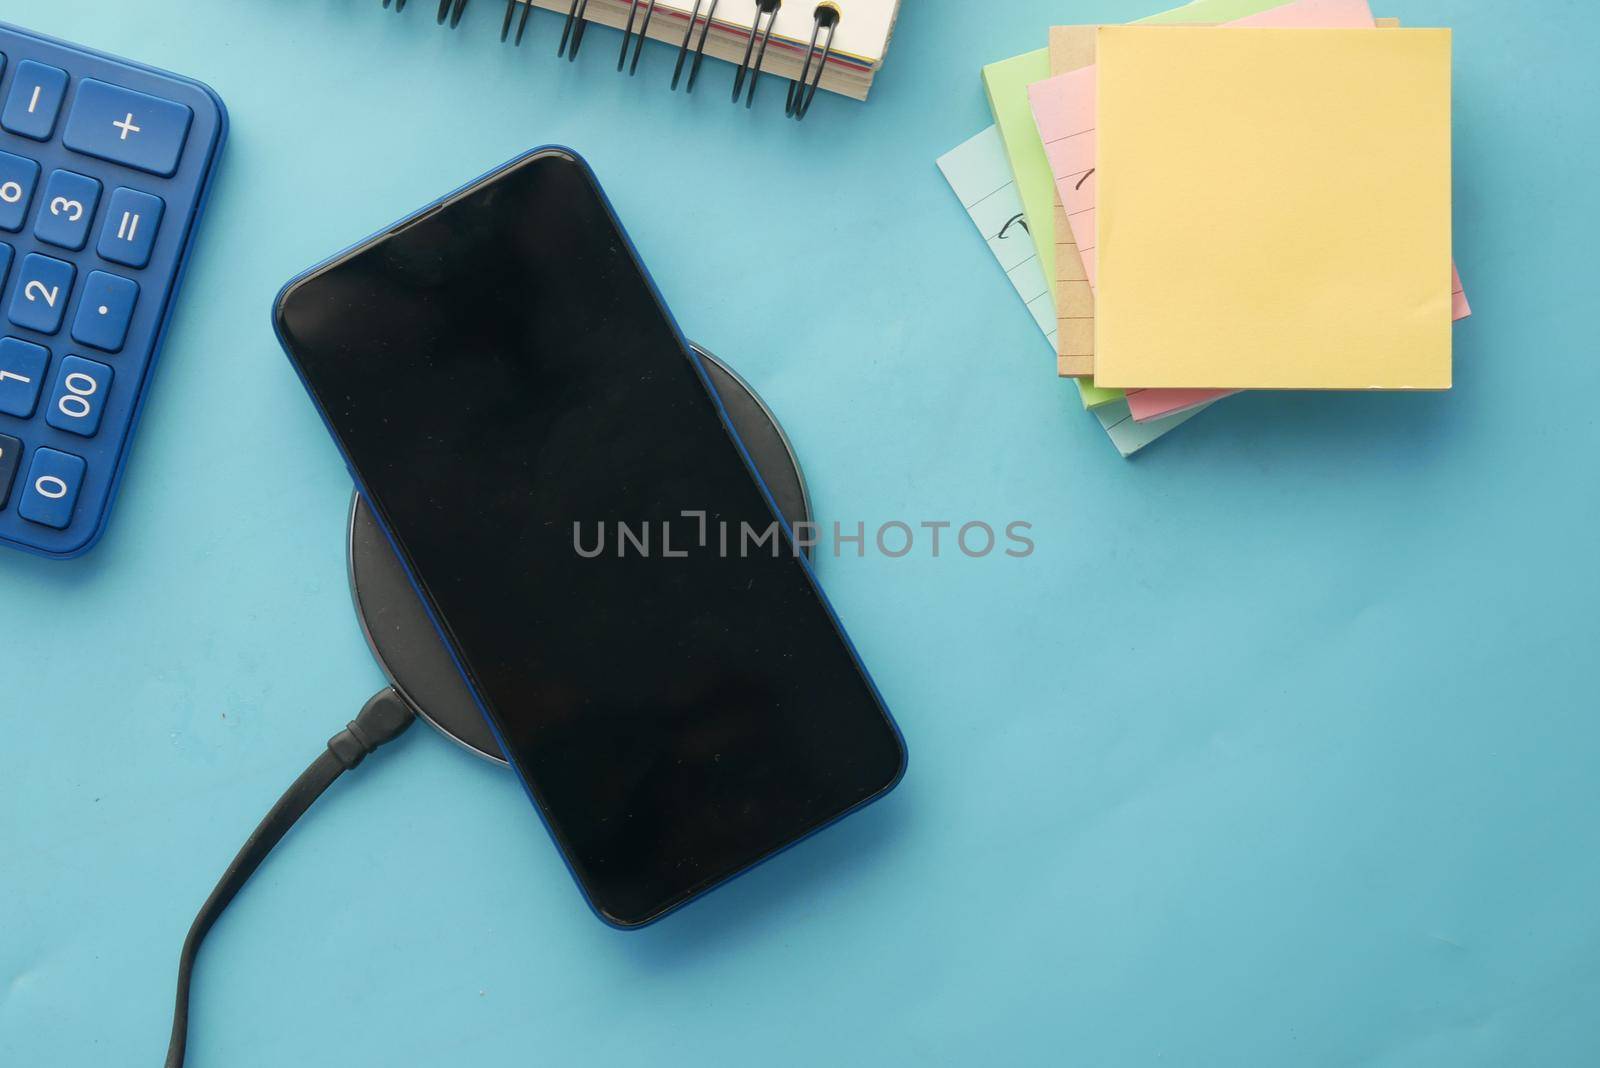 charging Smartphone using Wireless Charging Pad, top view by towfiq007